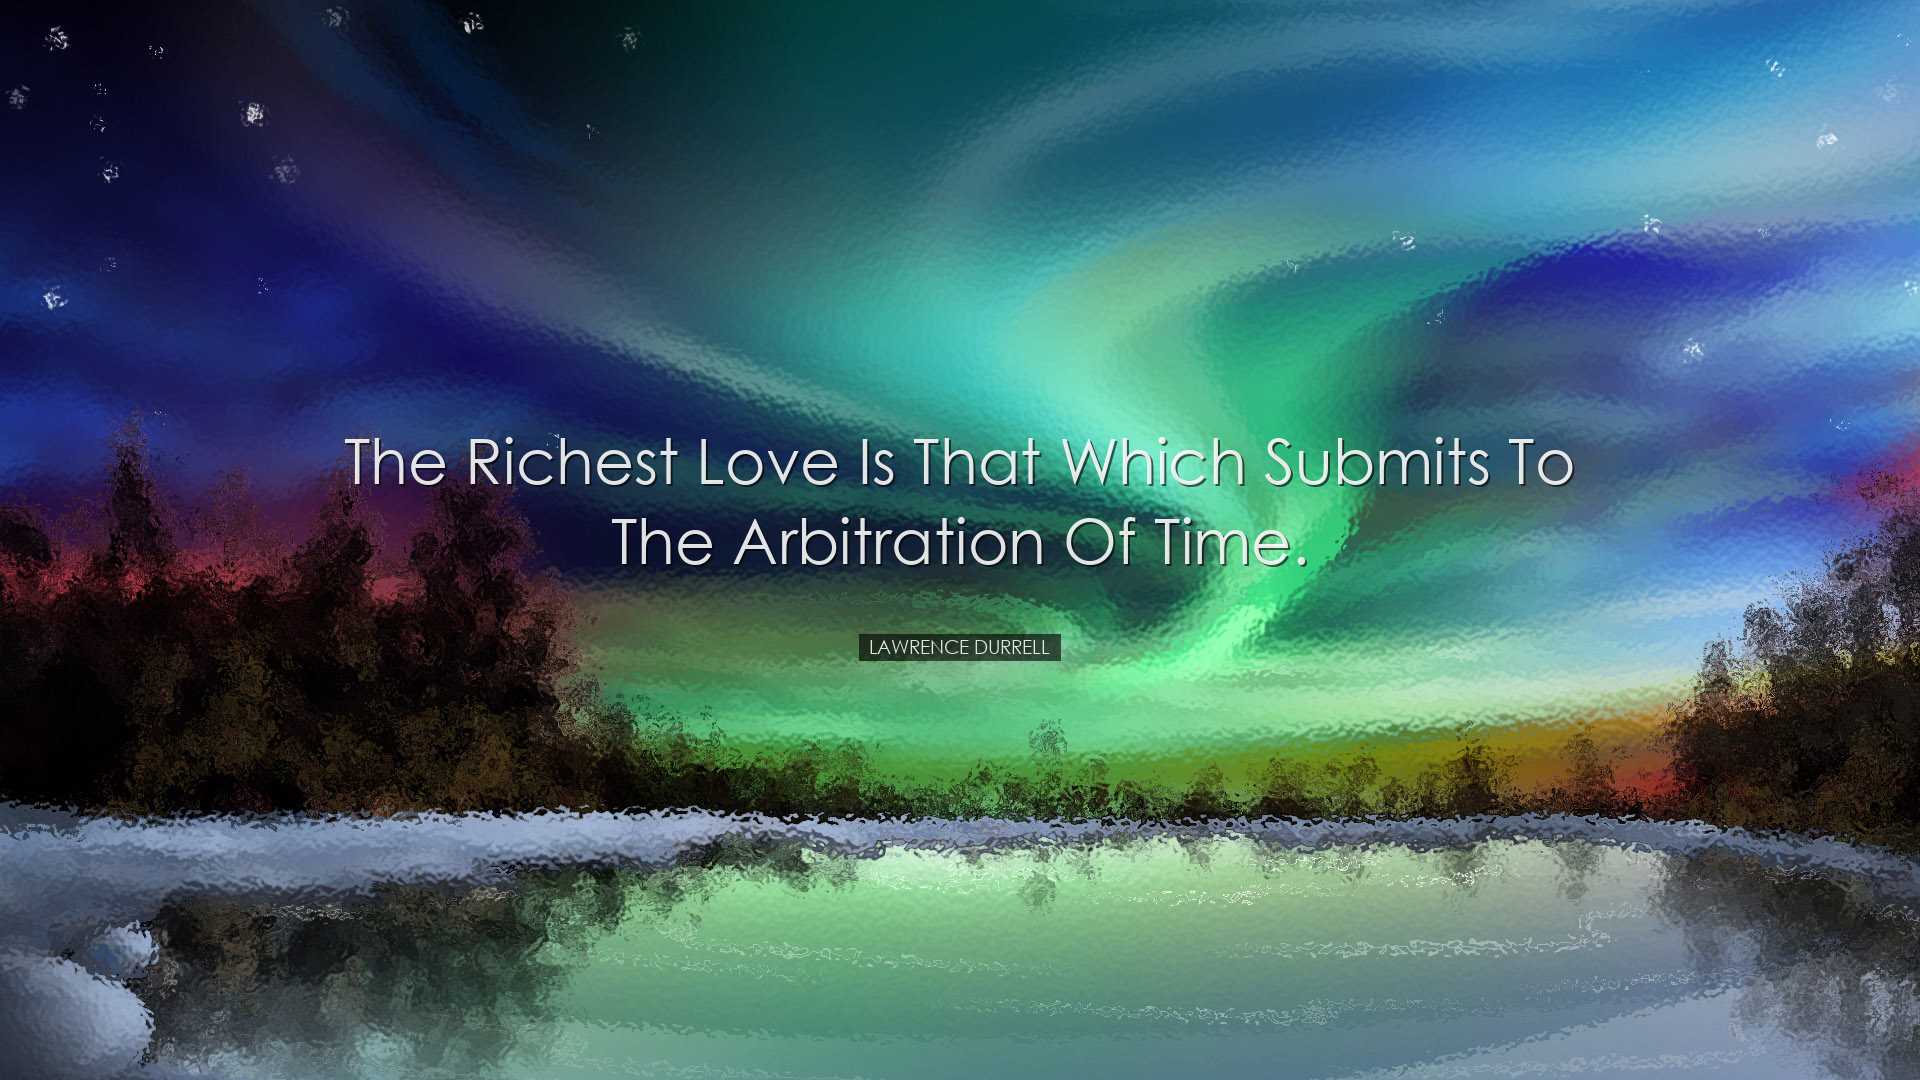 The richest love is that which submits to the arbitration of time.